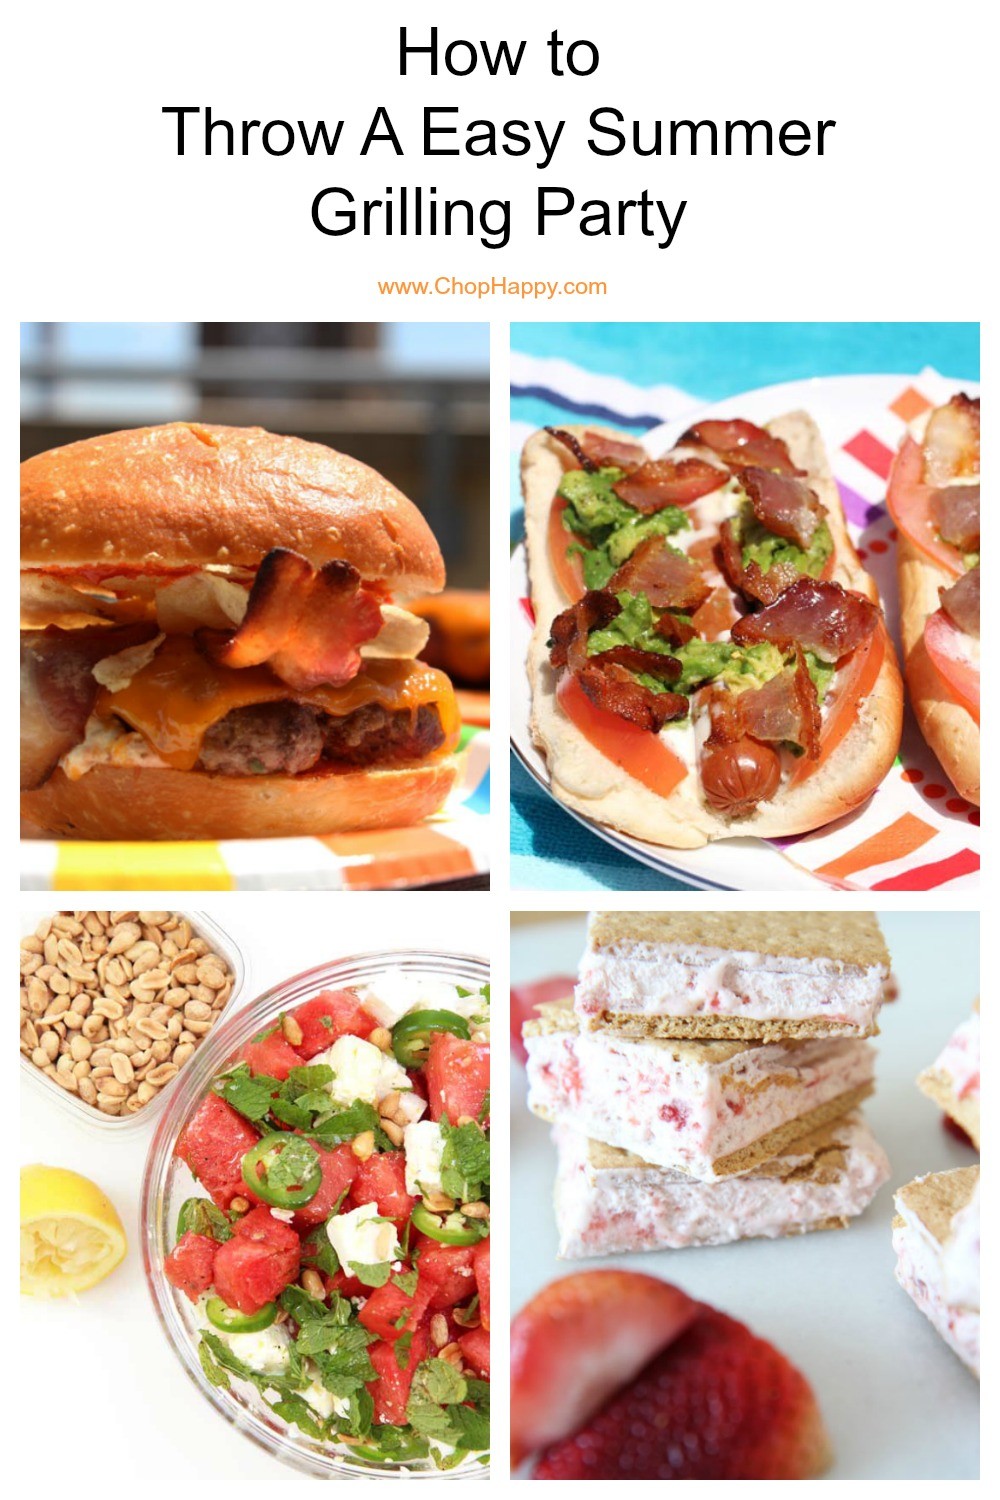 How to throw a easy summer party. Here is step by step guide to an easy backyard BBQ. The recipes include frozen mango drink, watermelon feta salad, avocado potato salad, jalapeno popper burgers, BLT hot dogs, and 3 ingredient ice cream. Happy Summer Eats! #summerrecipes #grillingrecipes